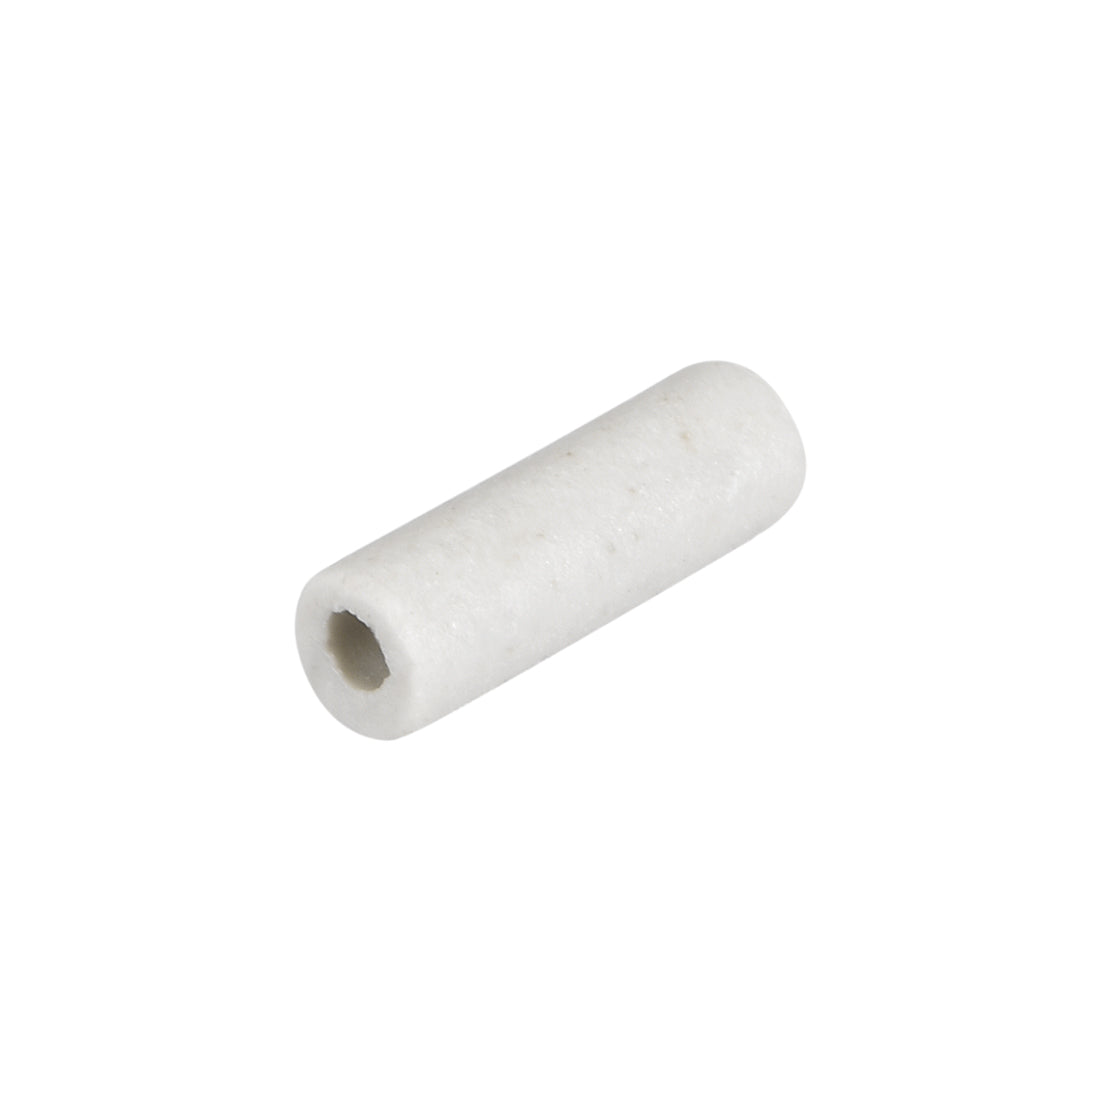 uxcell Uxcell 1mm Dia Ceramic Insulation Tube Single Bore Porcelain Insulator Pipe 500 Pcs